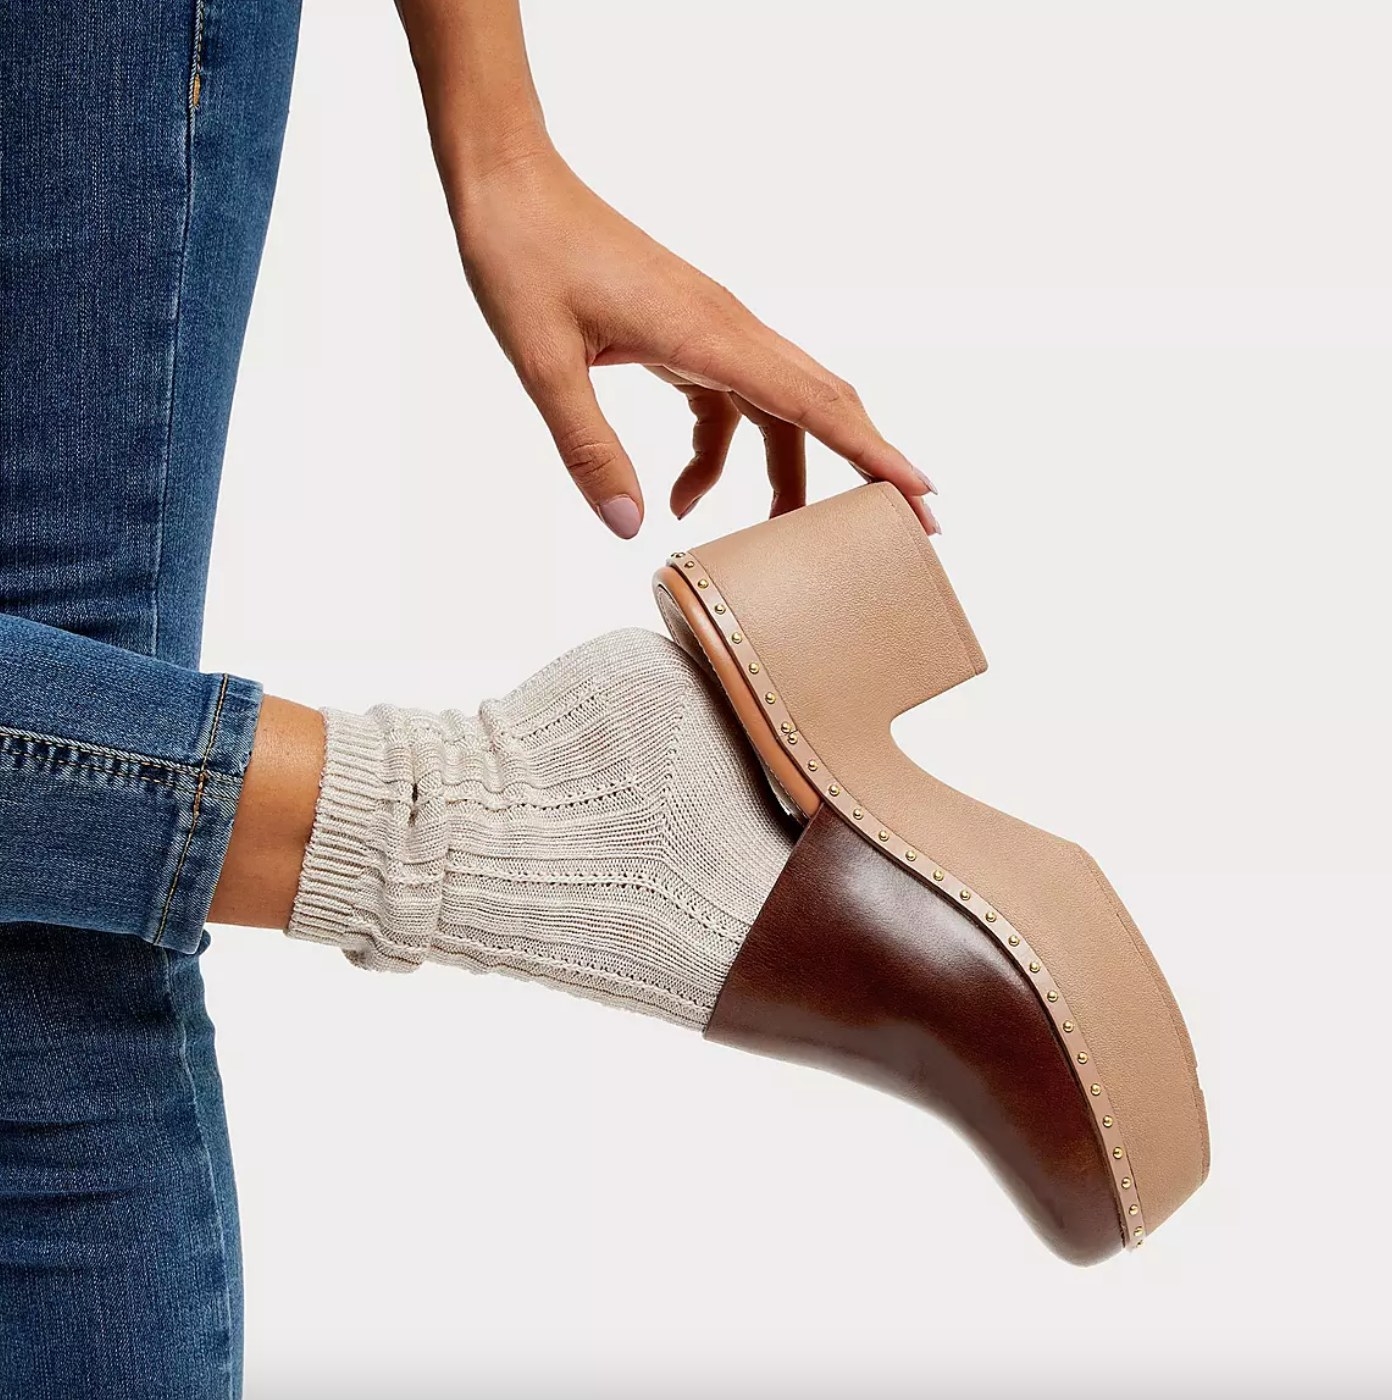 The pair of leather mule platforms in chocolate brown on a model wearing knit socks